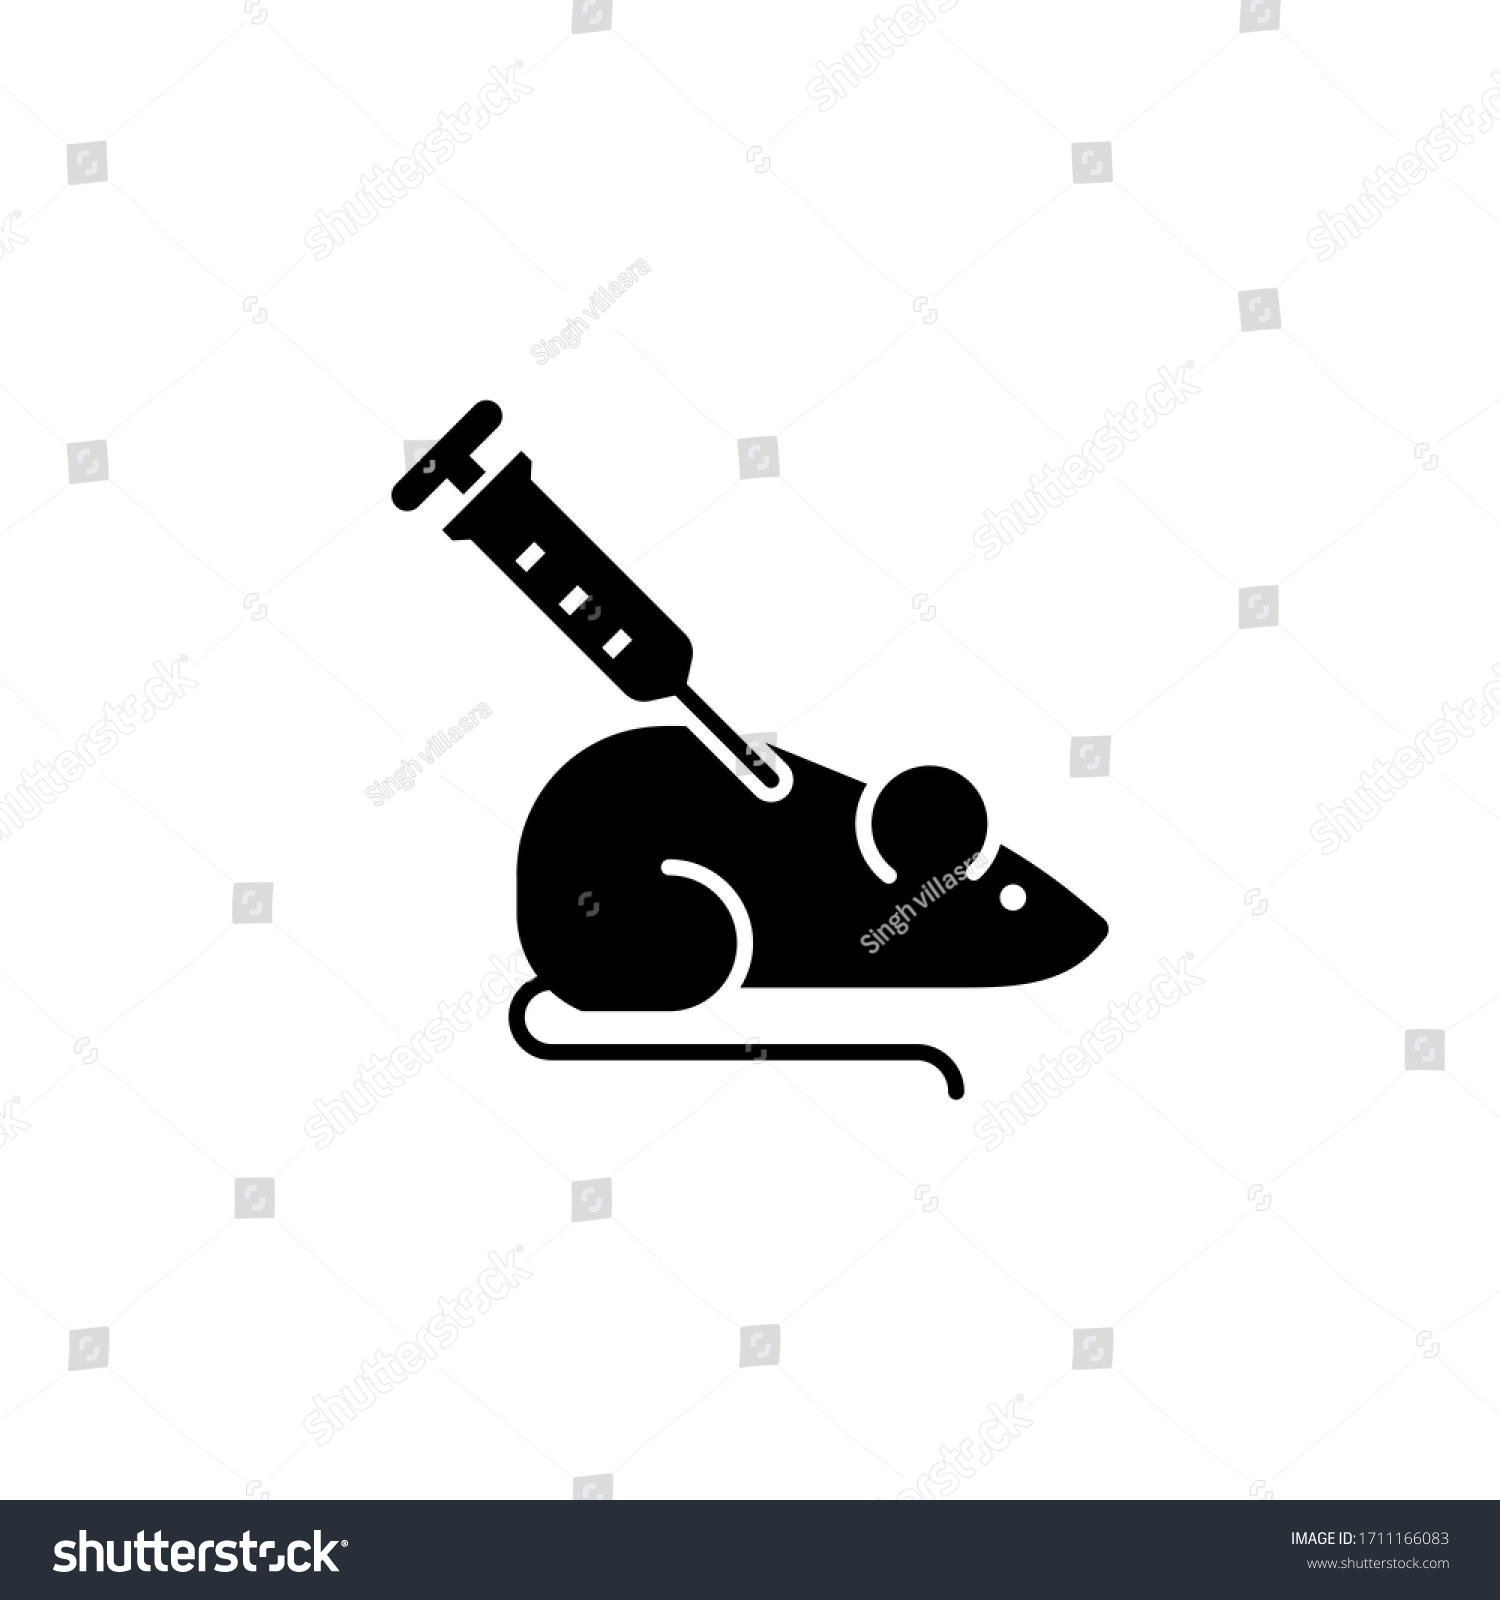 Laboratory Rat Experiment Research Concept Vector Stock Vector (Royalty ...